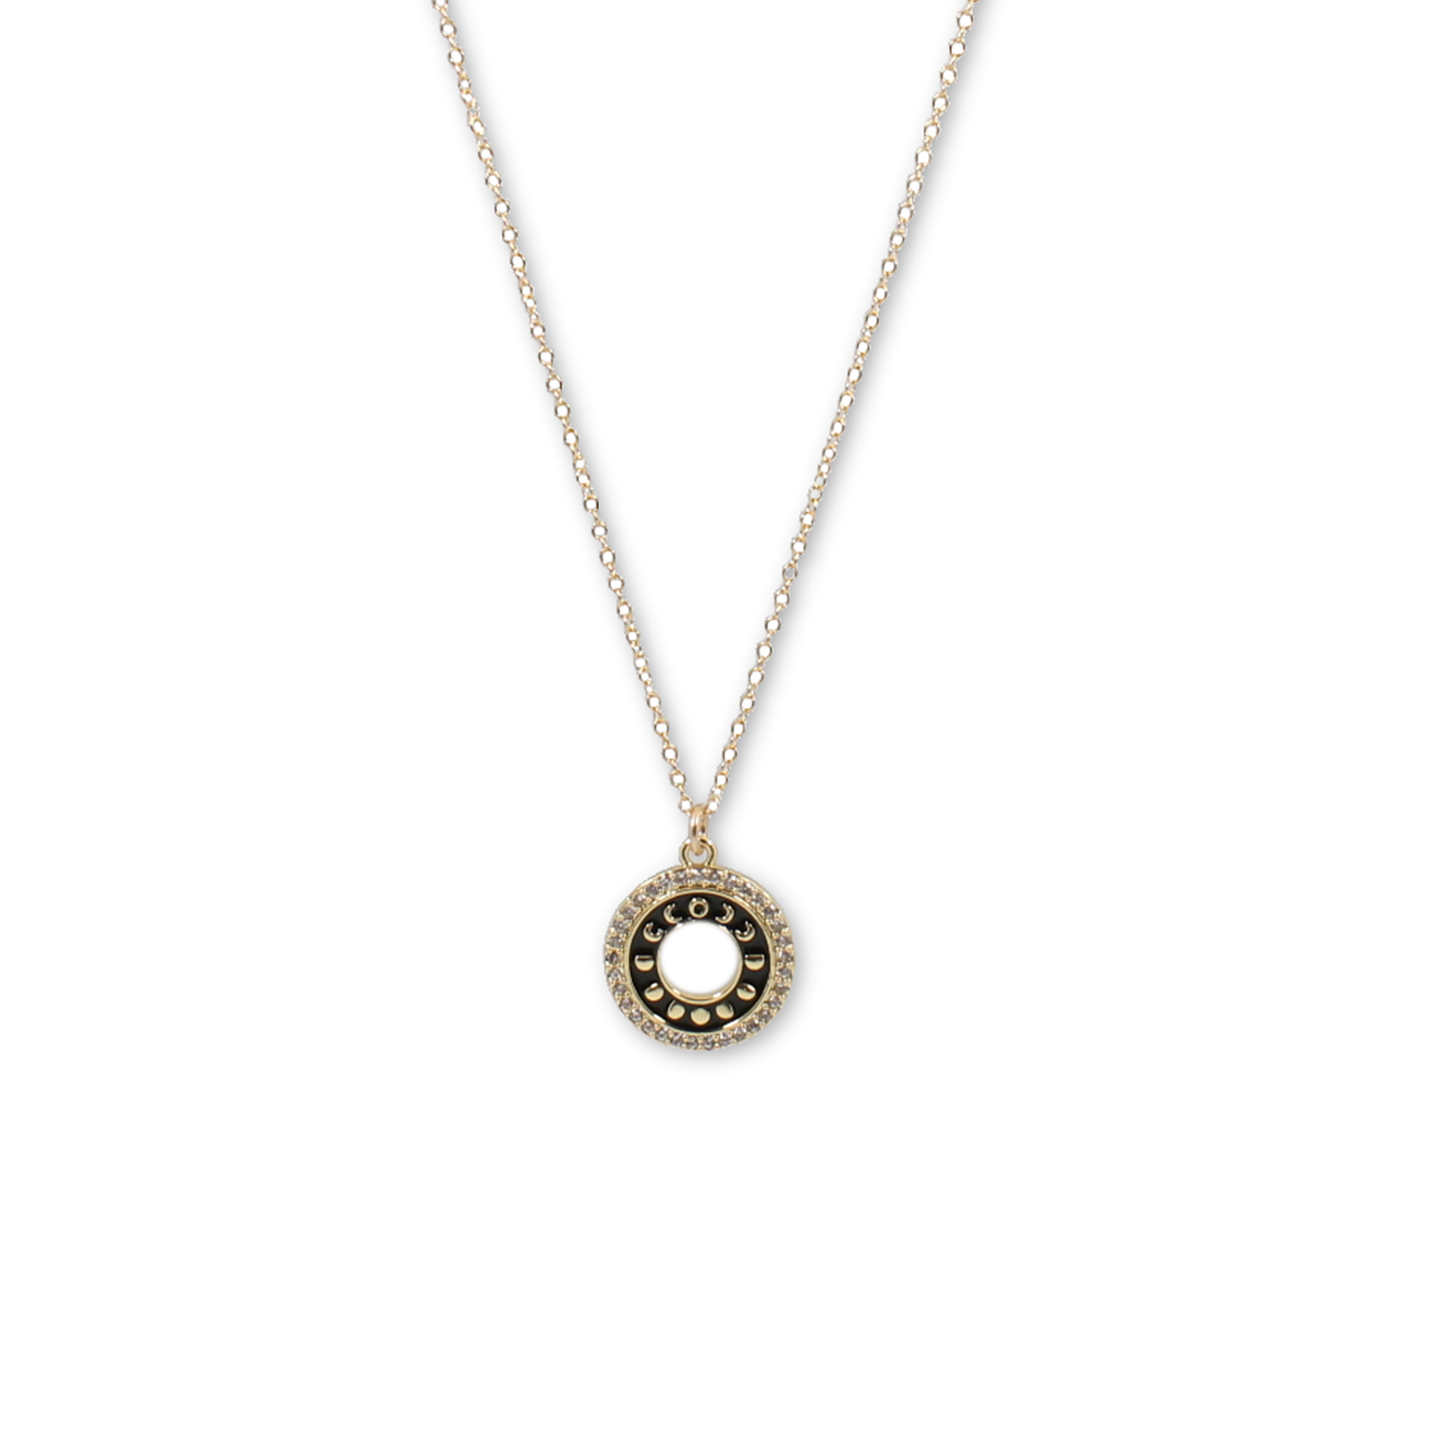 Evolve: Moon Phases Medallion Necklace